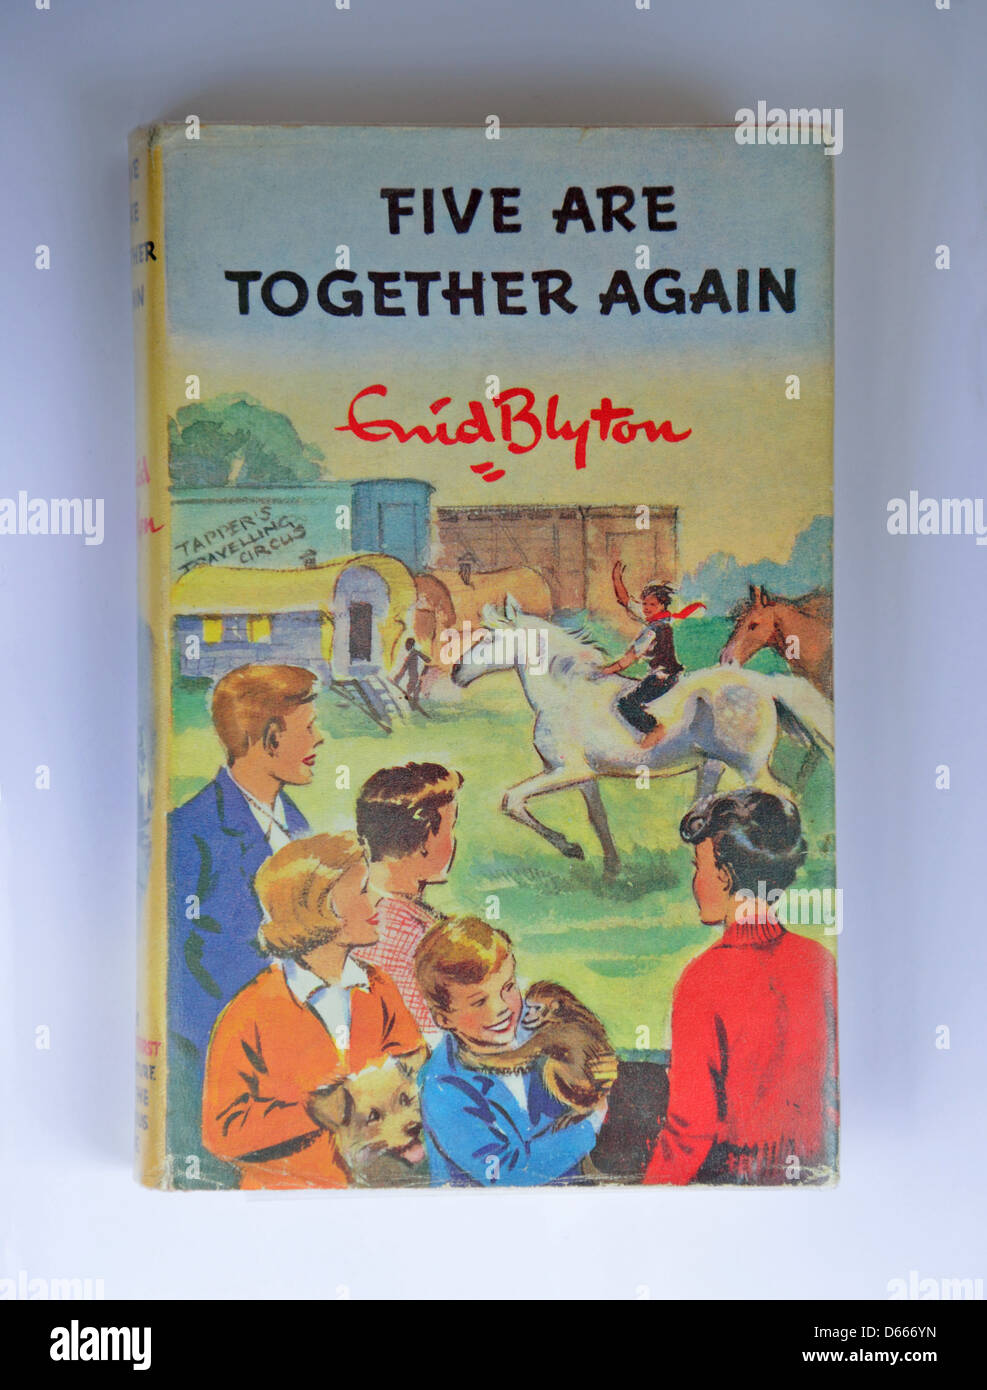 Enid Blyton's 'Five are together again' twenty first Famous Five book, Ascot, Windsor, Berkshire, England, United Kingdom Stock Photo